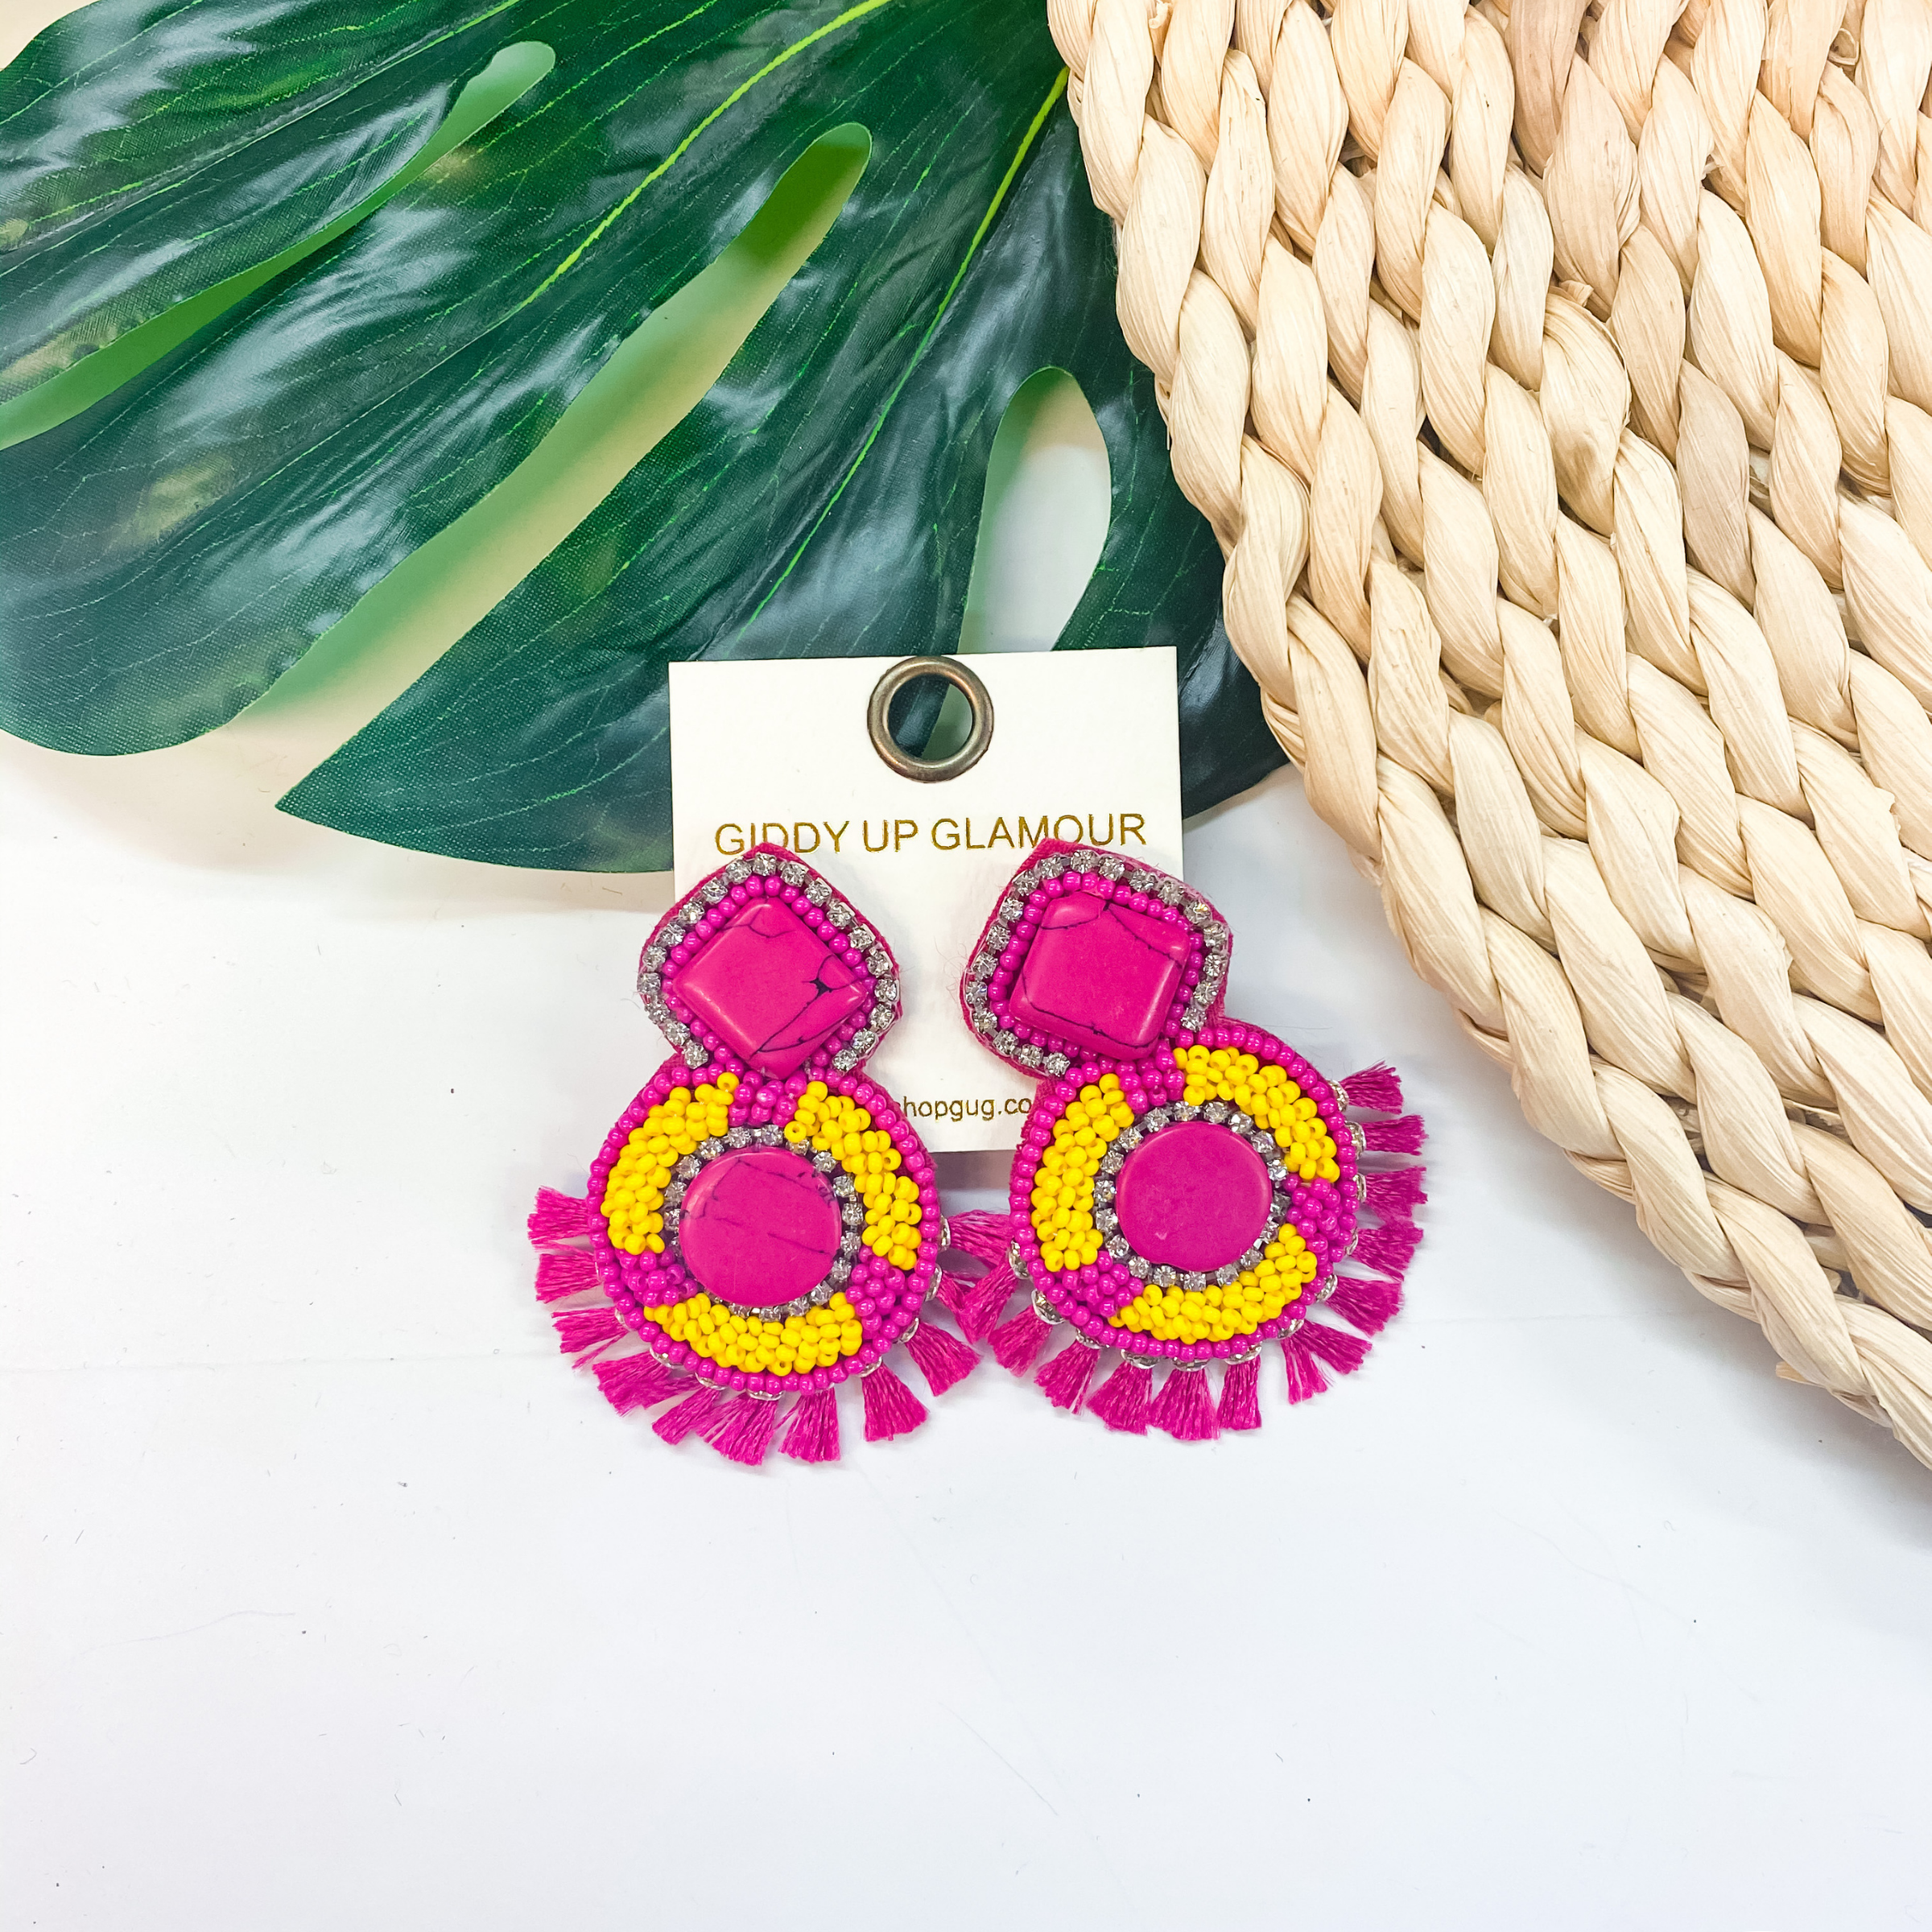 Seed Bead Earrings With Stone In Fuchsia - Giddy Up Glamour Boutique